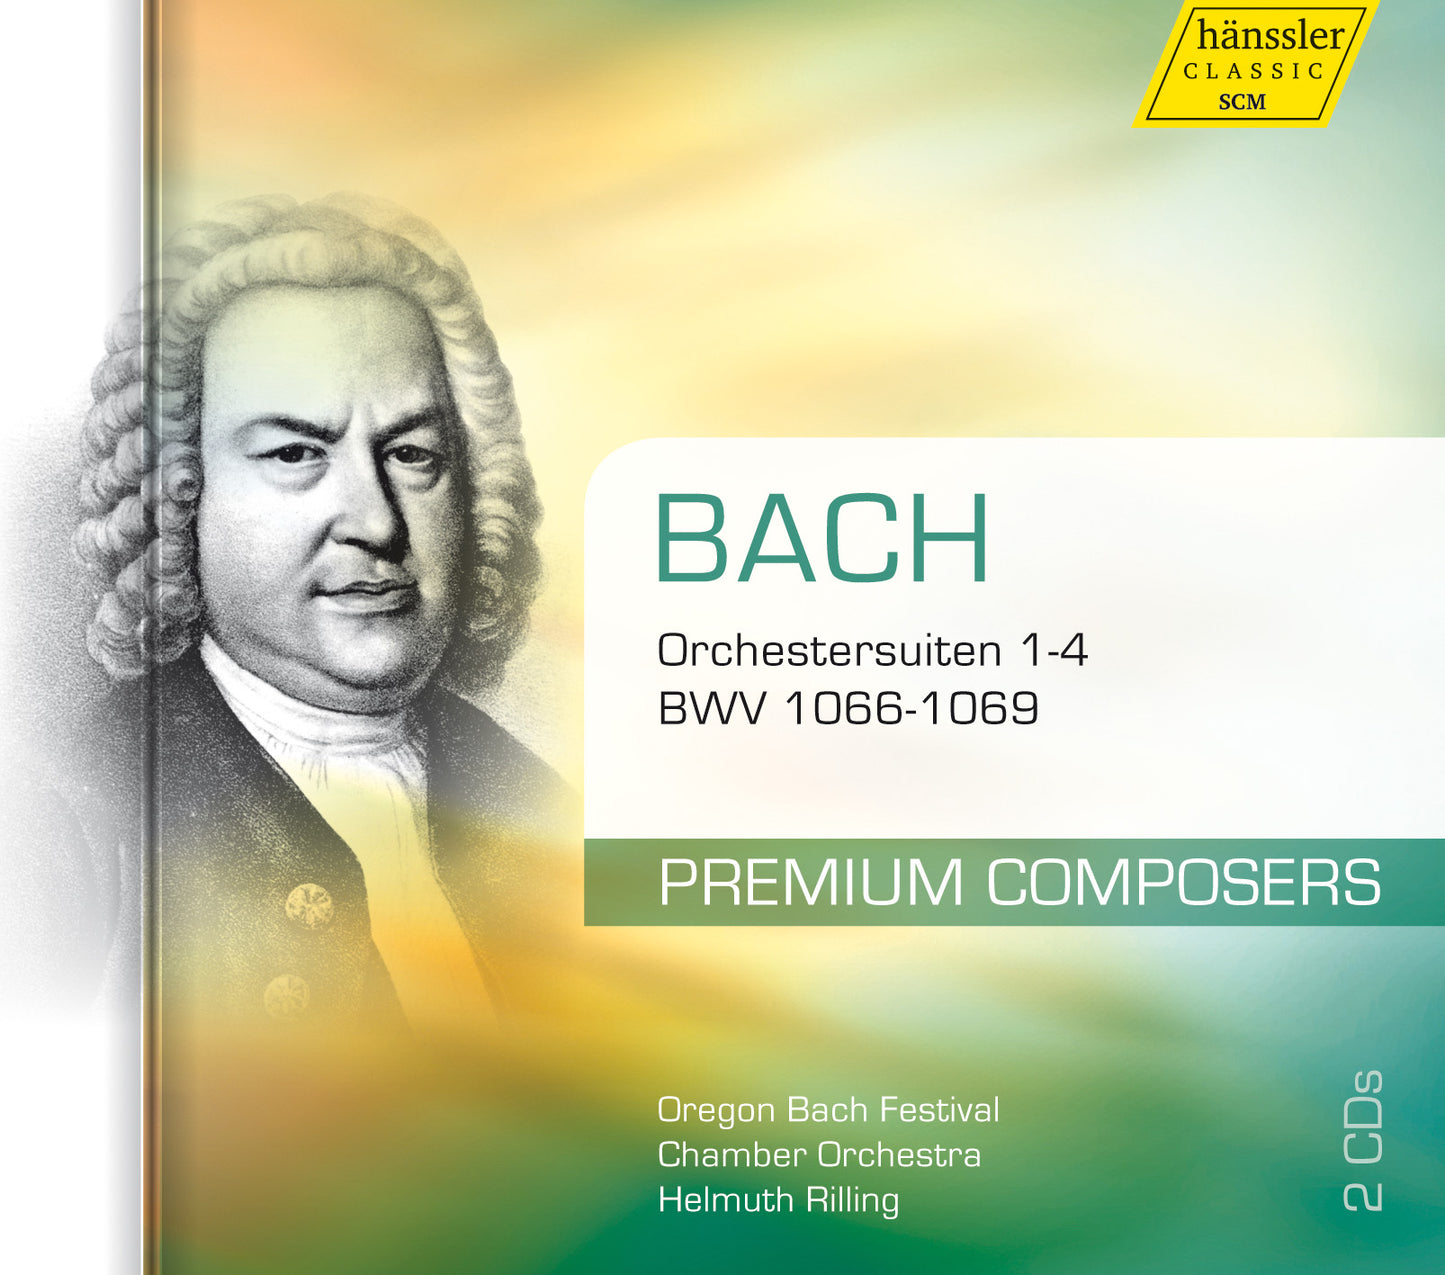 Bach: Orchestral Suites (Suites) BWV 1066-1069 / Oregon Bach Festival Chamber Orchestra